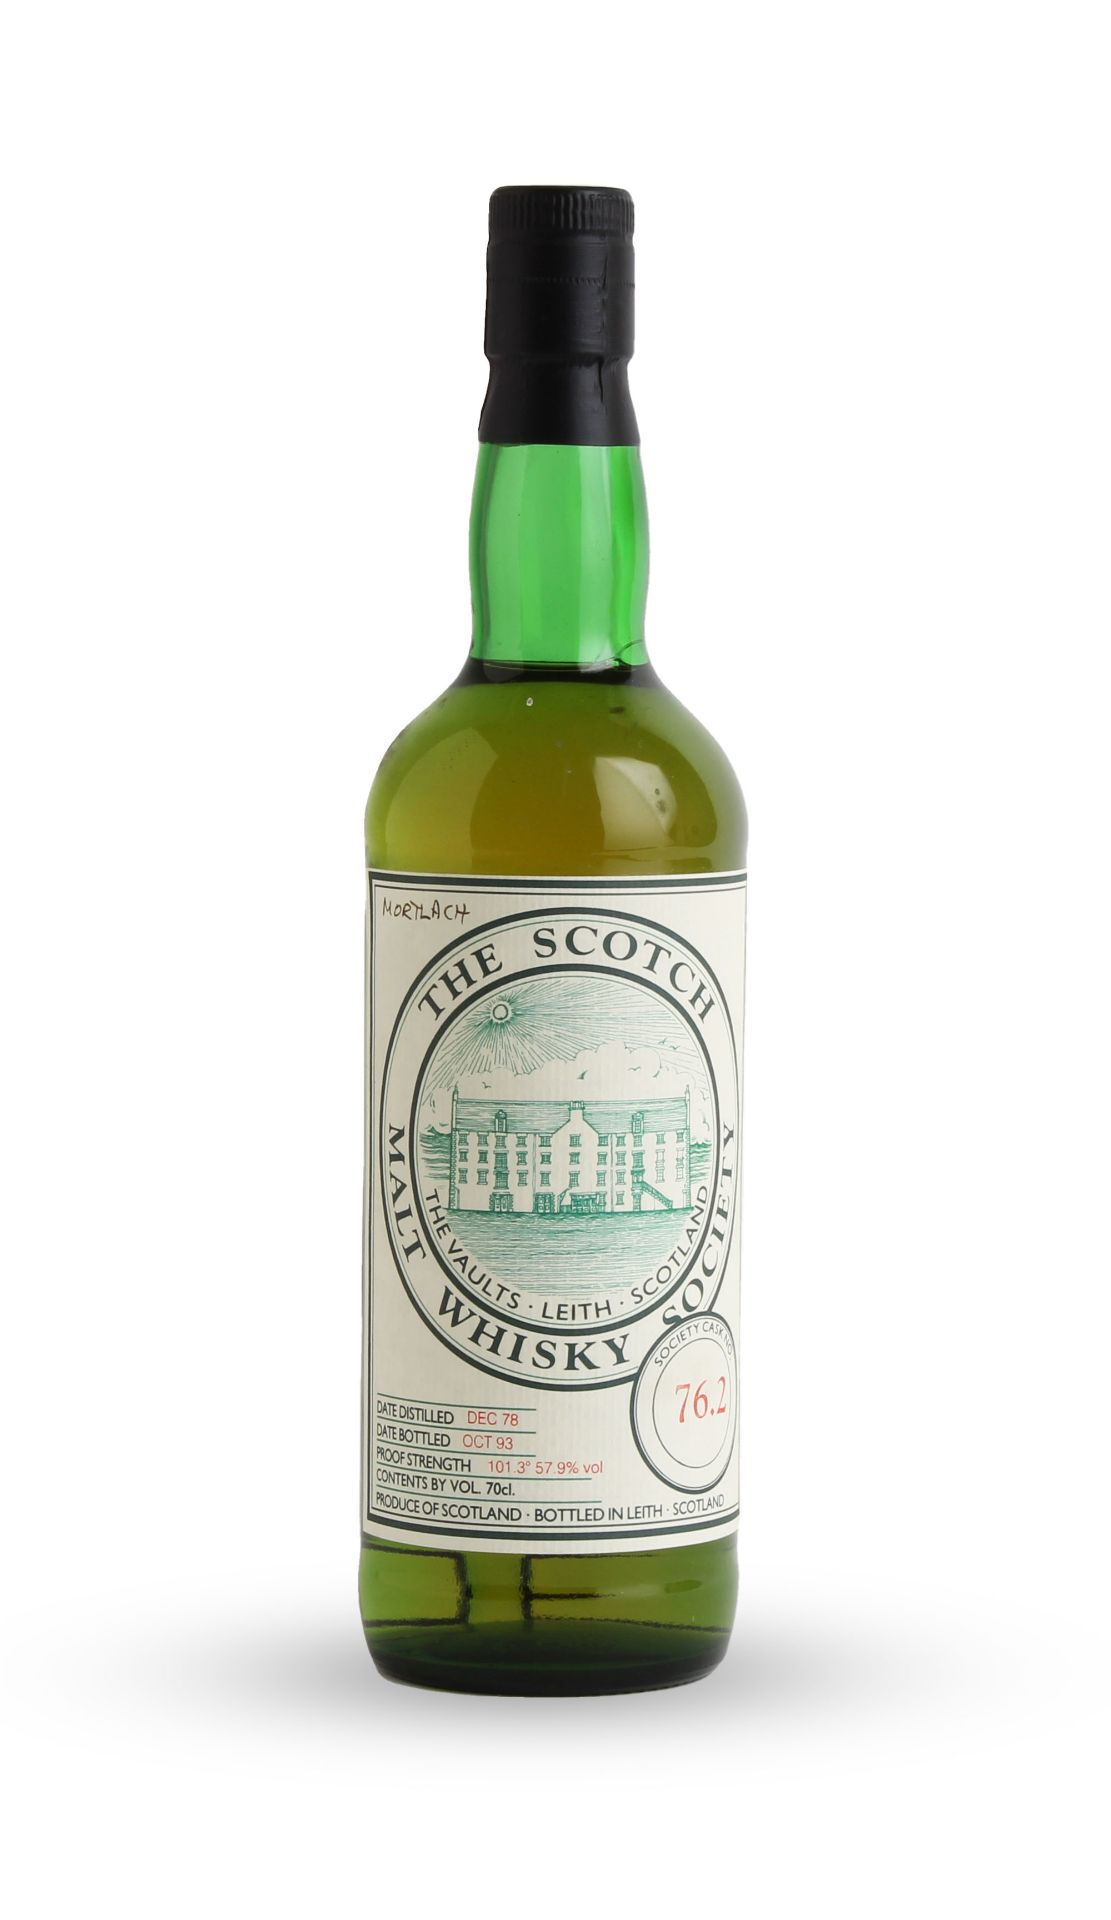 Mortlach-1978 (SMWS 76.2)